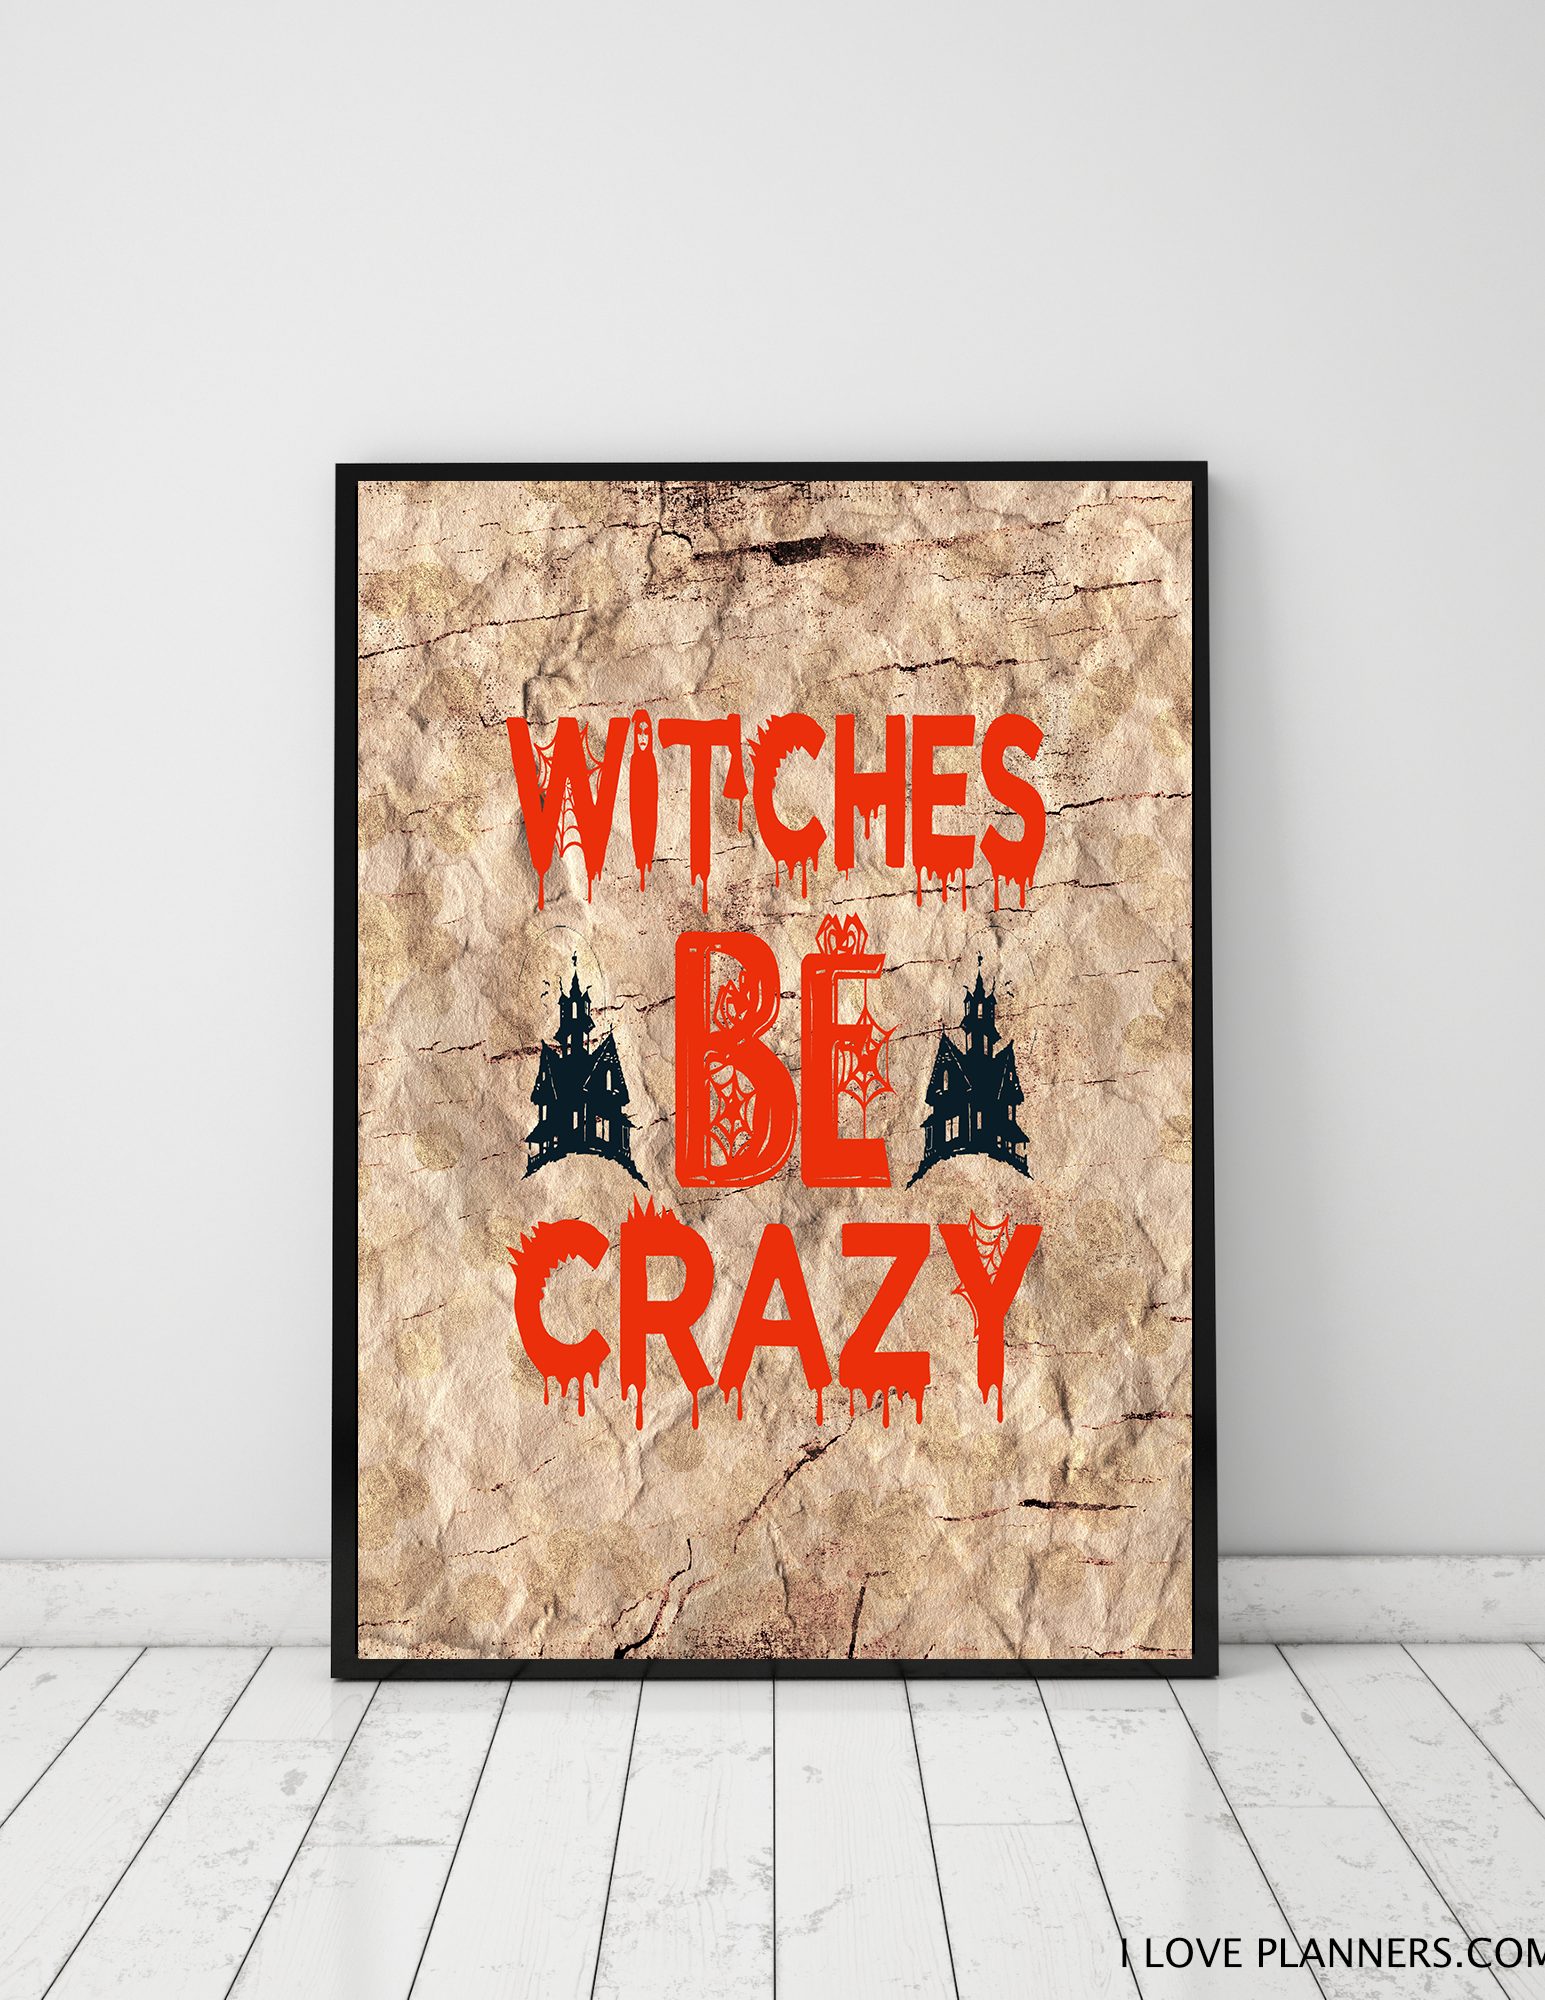 FREE Poster, Print It Yourself, DIY, Instant Download, Printable: Budget Halloween Decoration 7